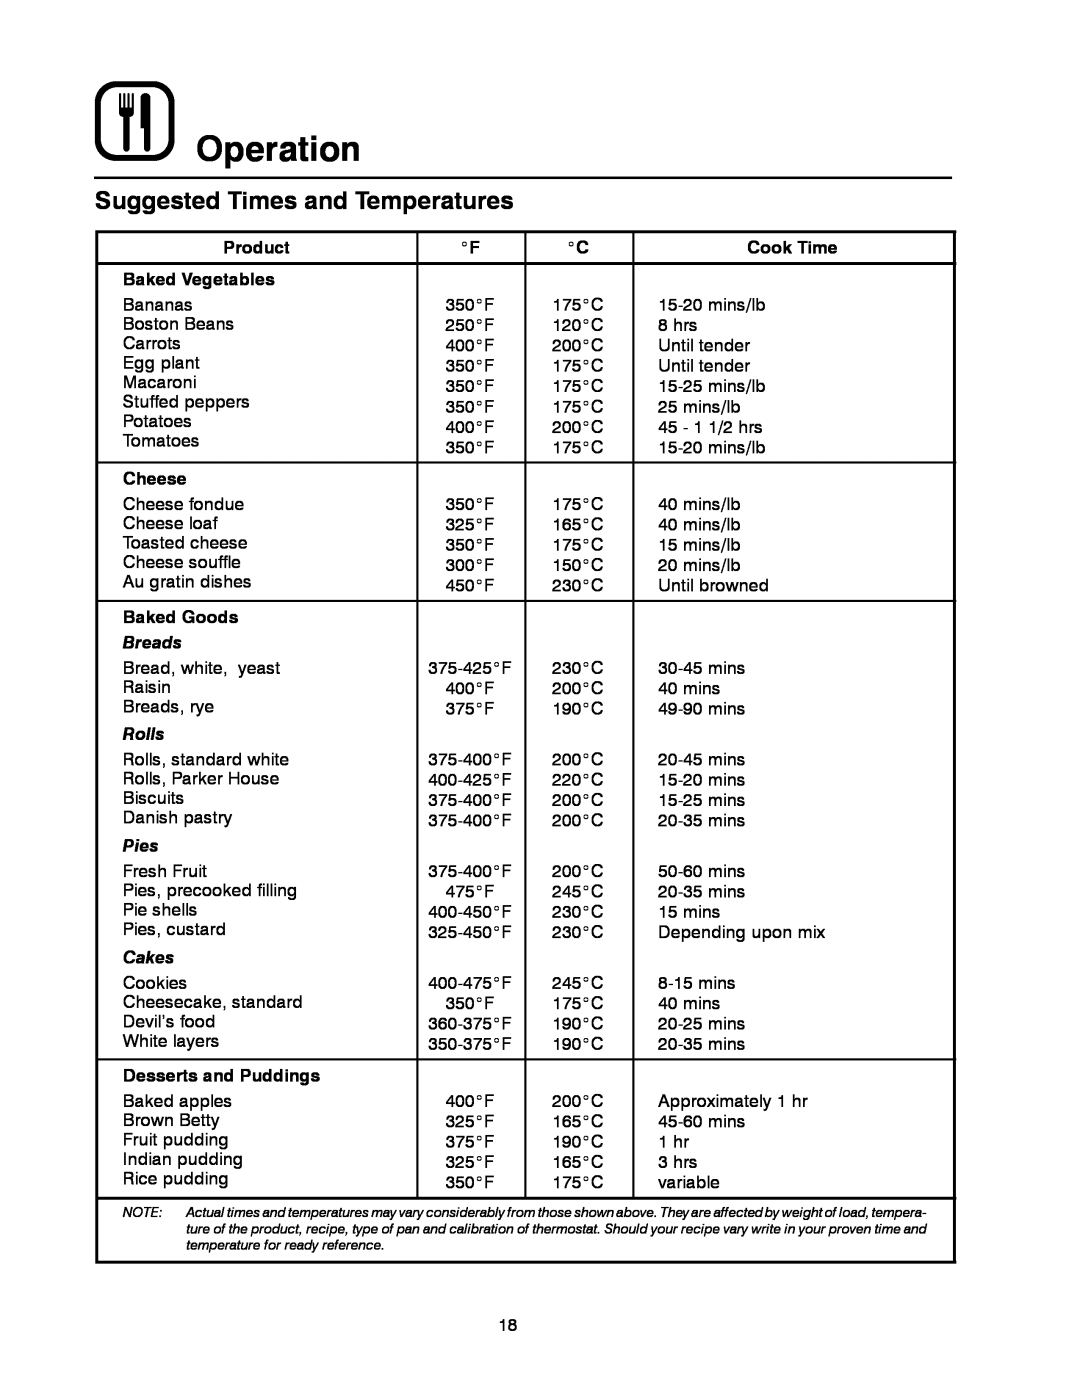 Blodgett 900 SERIES Suggested Times and Temperatures, Operation, Product, Cook Time, Baked Vegetables, Cheese, Baked Goods 